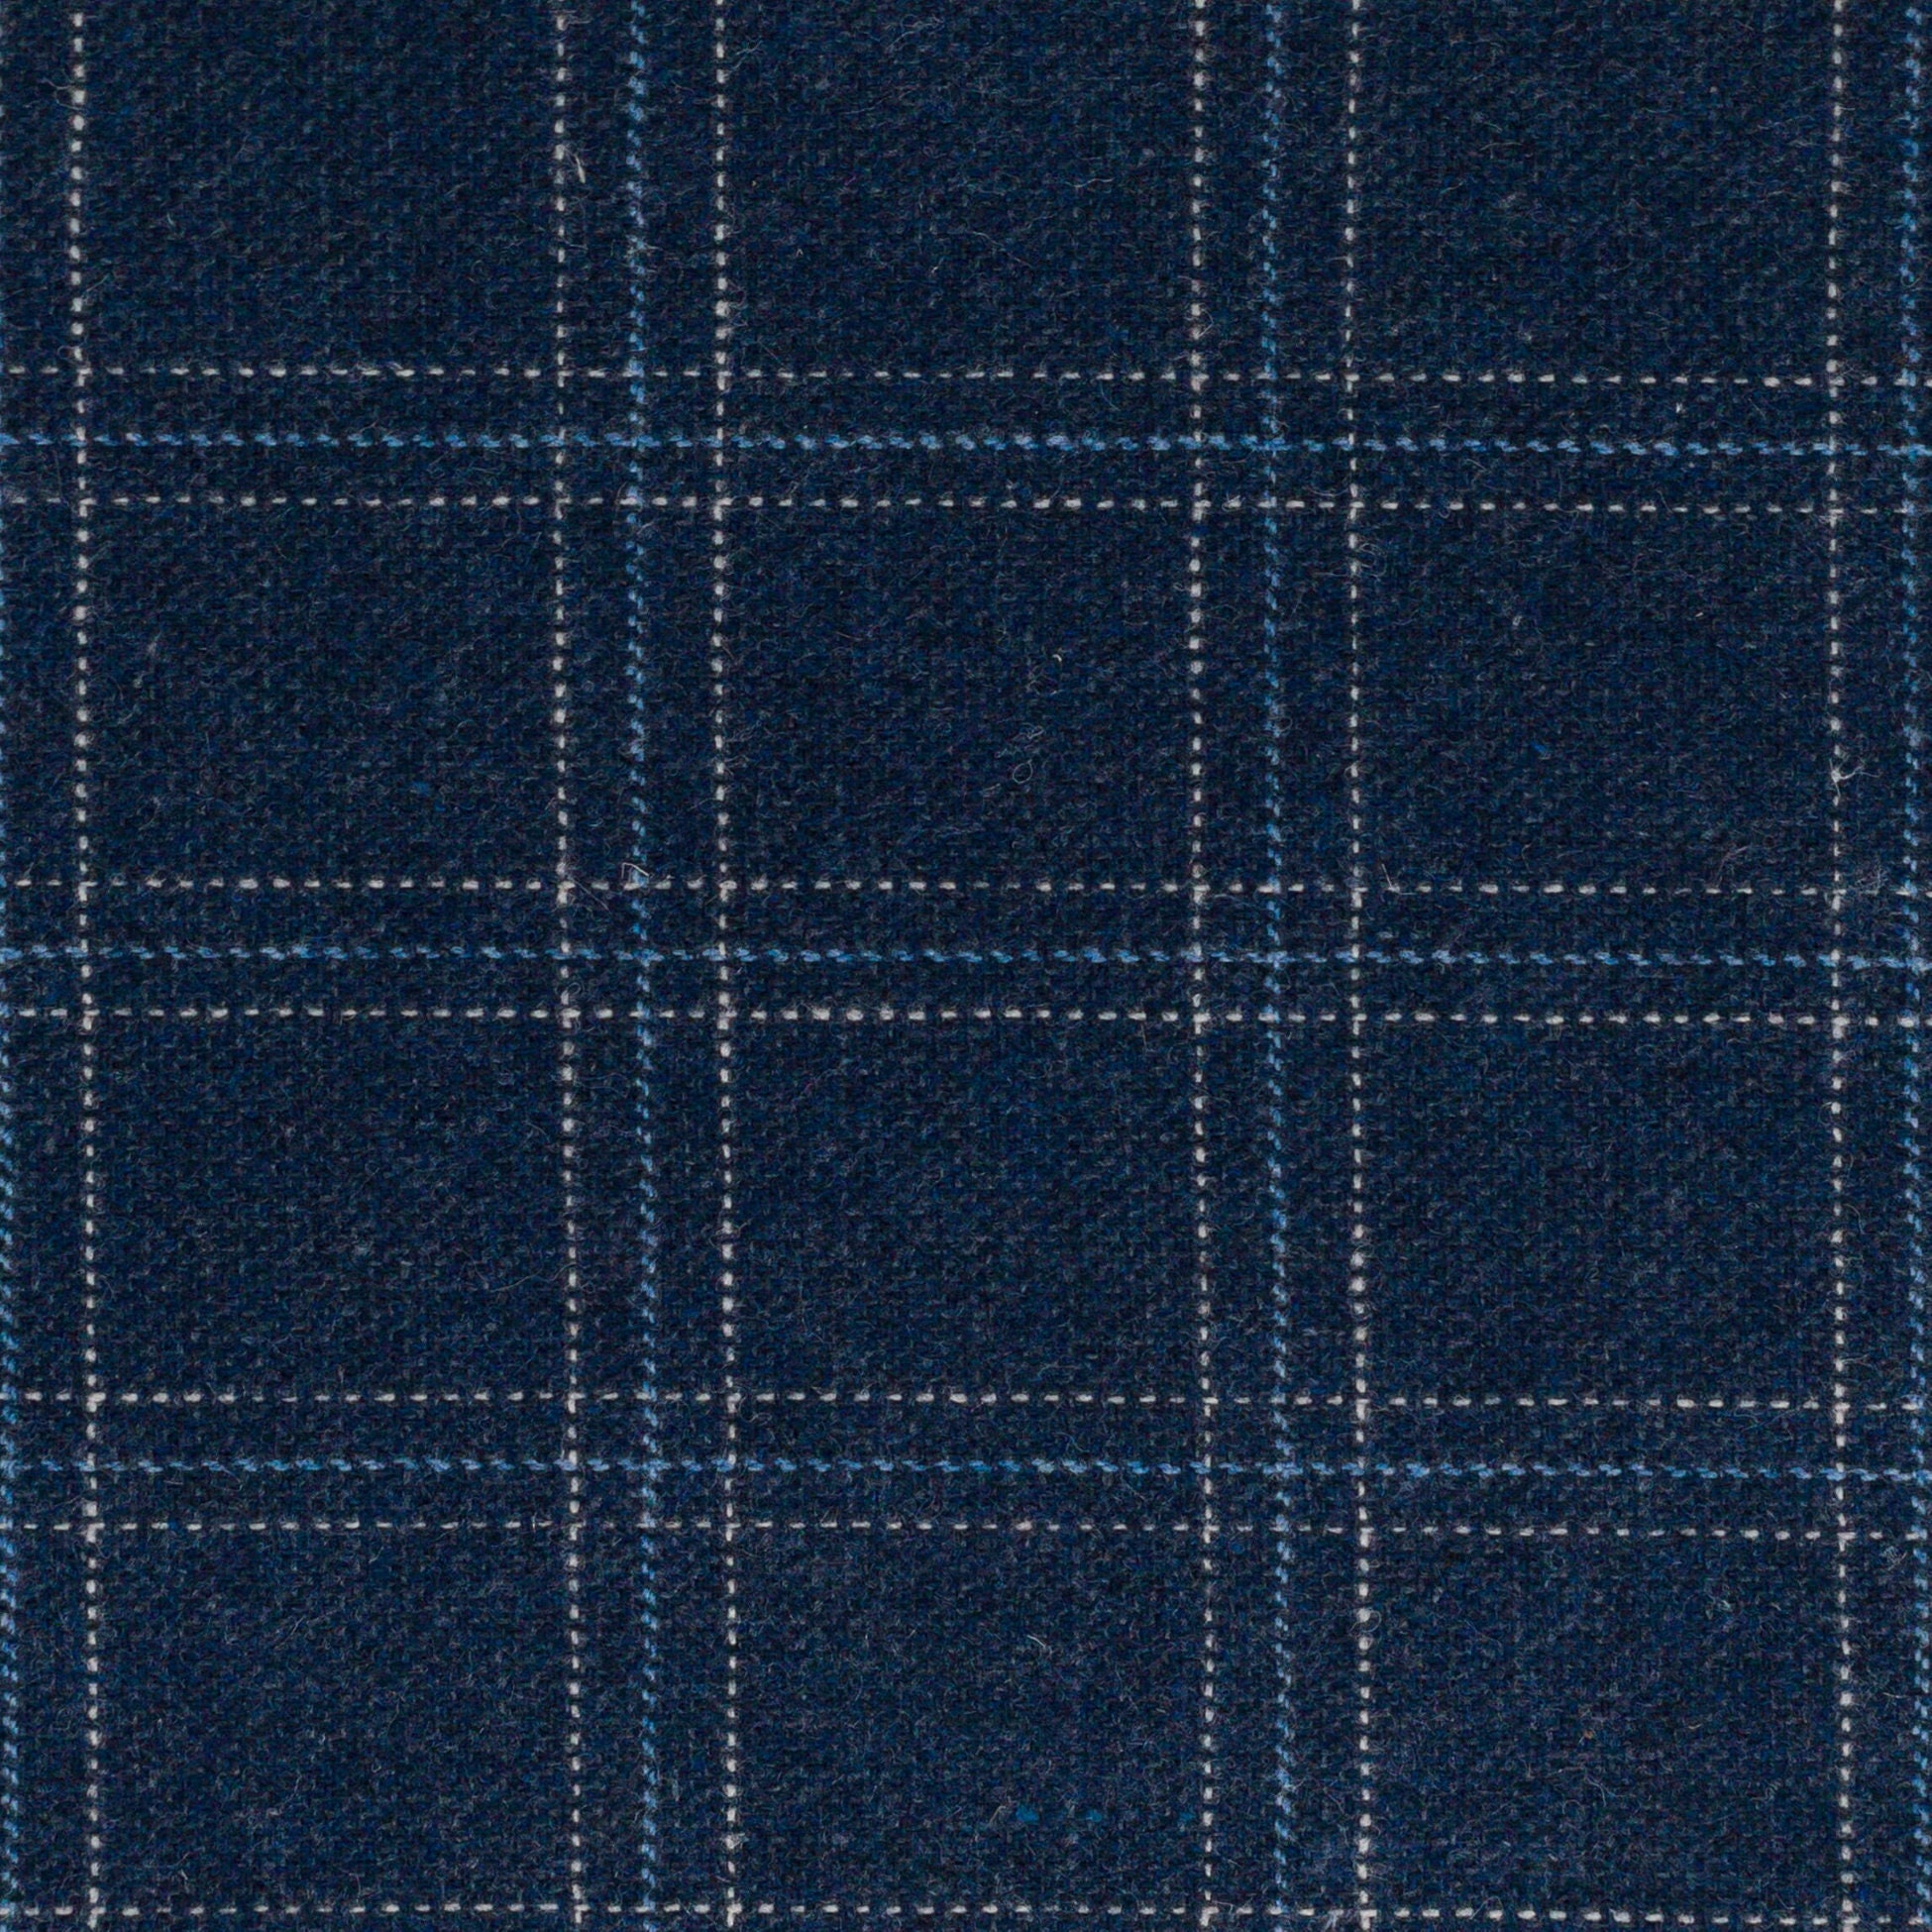 Blue Check Fabric Plaid Upholstery Furniture Pillow Dark Fabric Etsy Dark SP Blue 281 Fabric Plaid for Navy Navy Wool Plaid Fabric Navy -